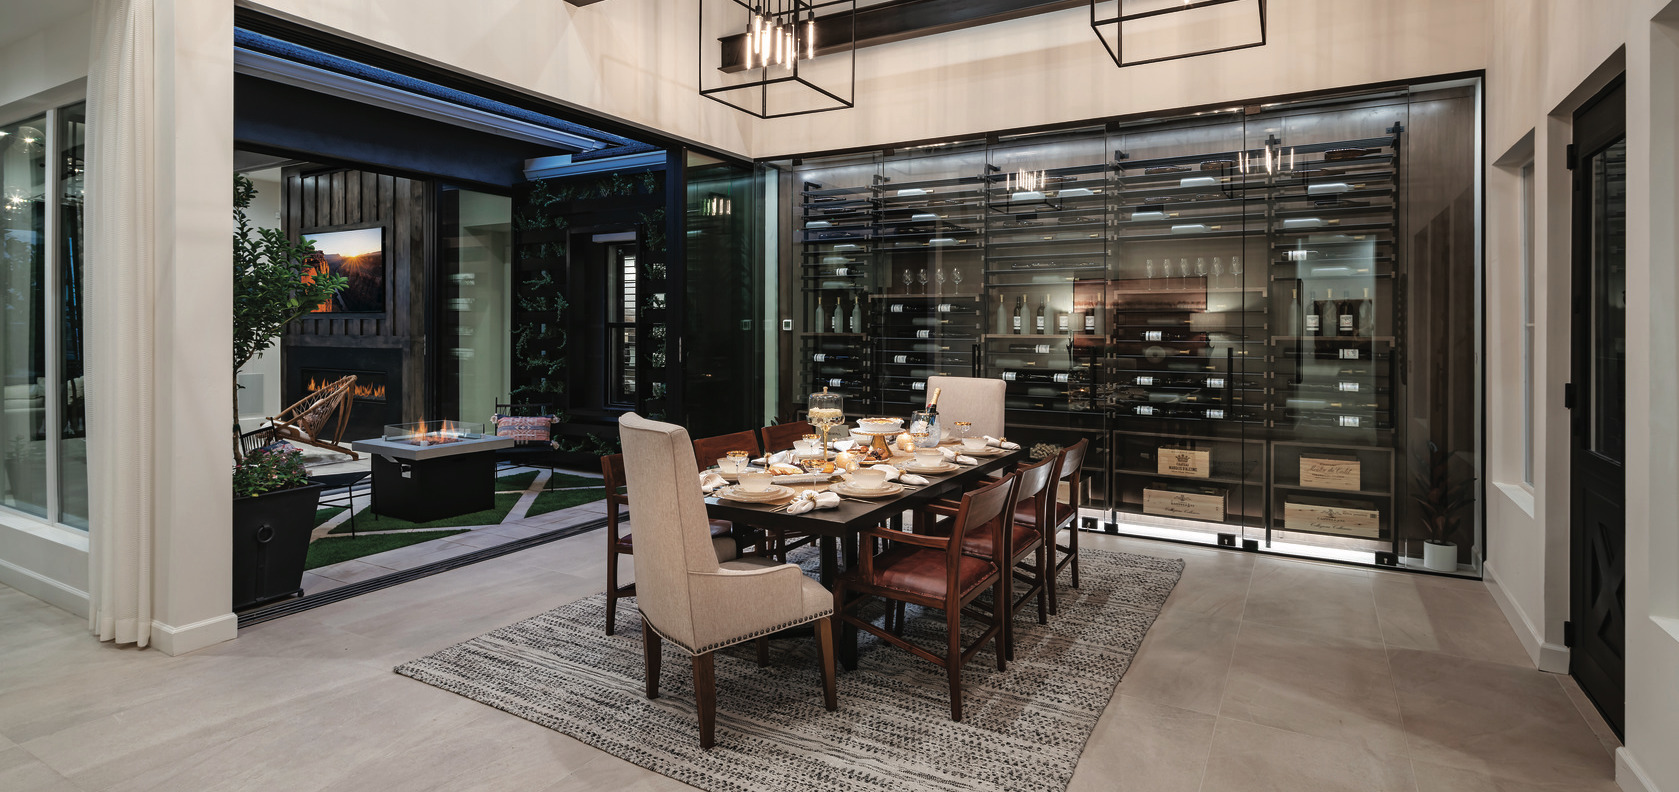 Dining room with wine room and view to outdoor living space